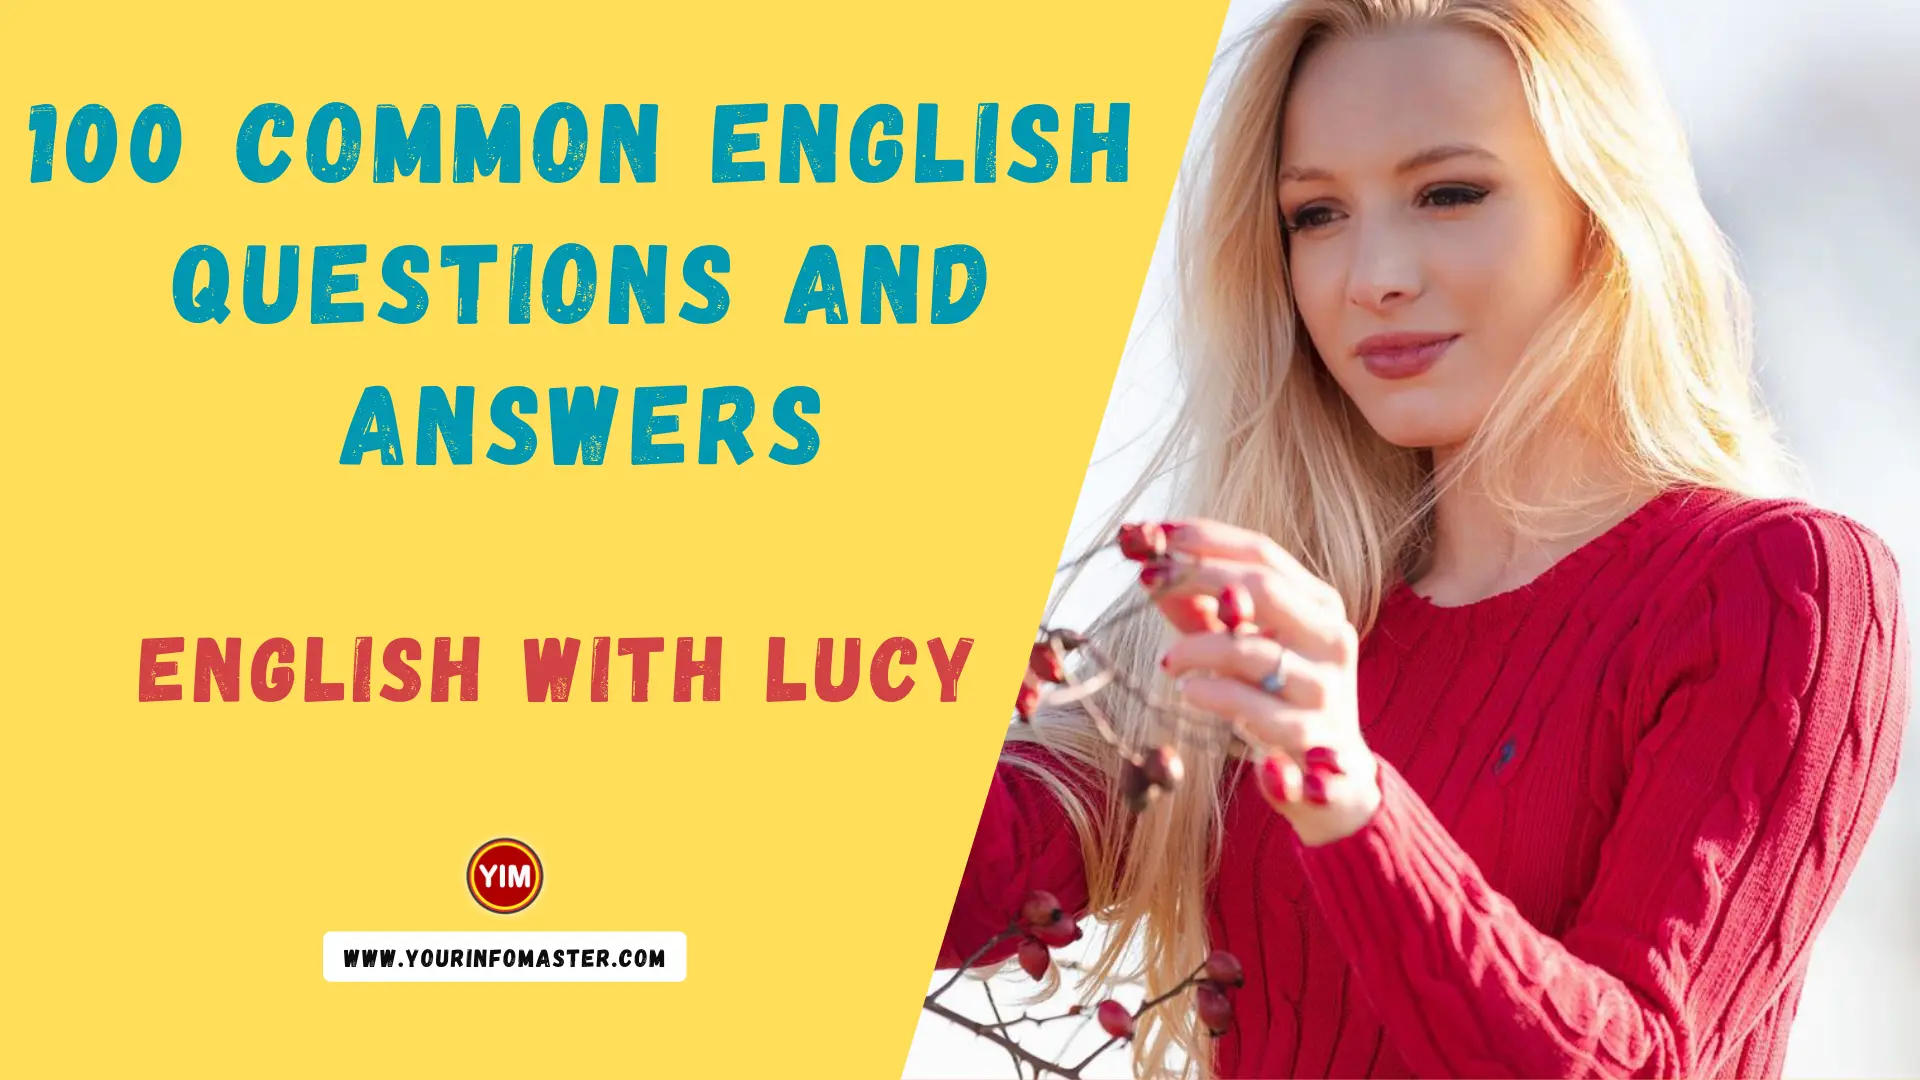 100 Common English Questions and Answers